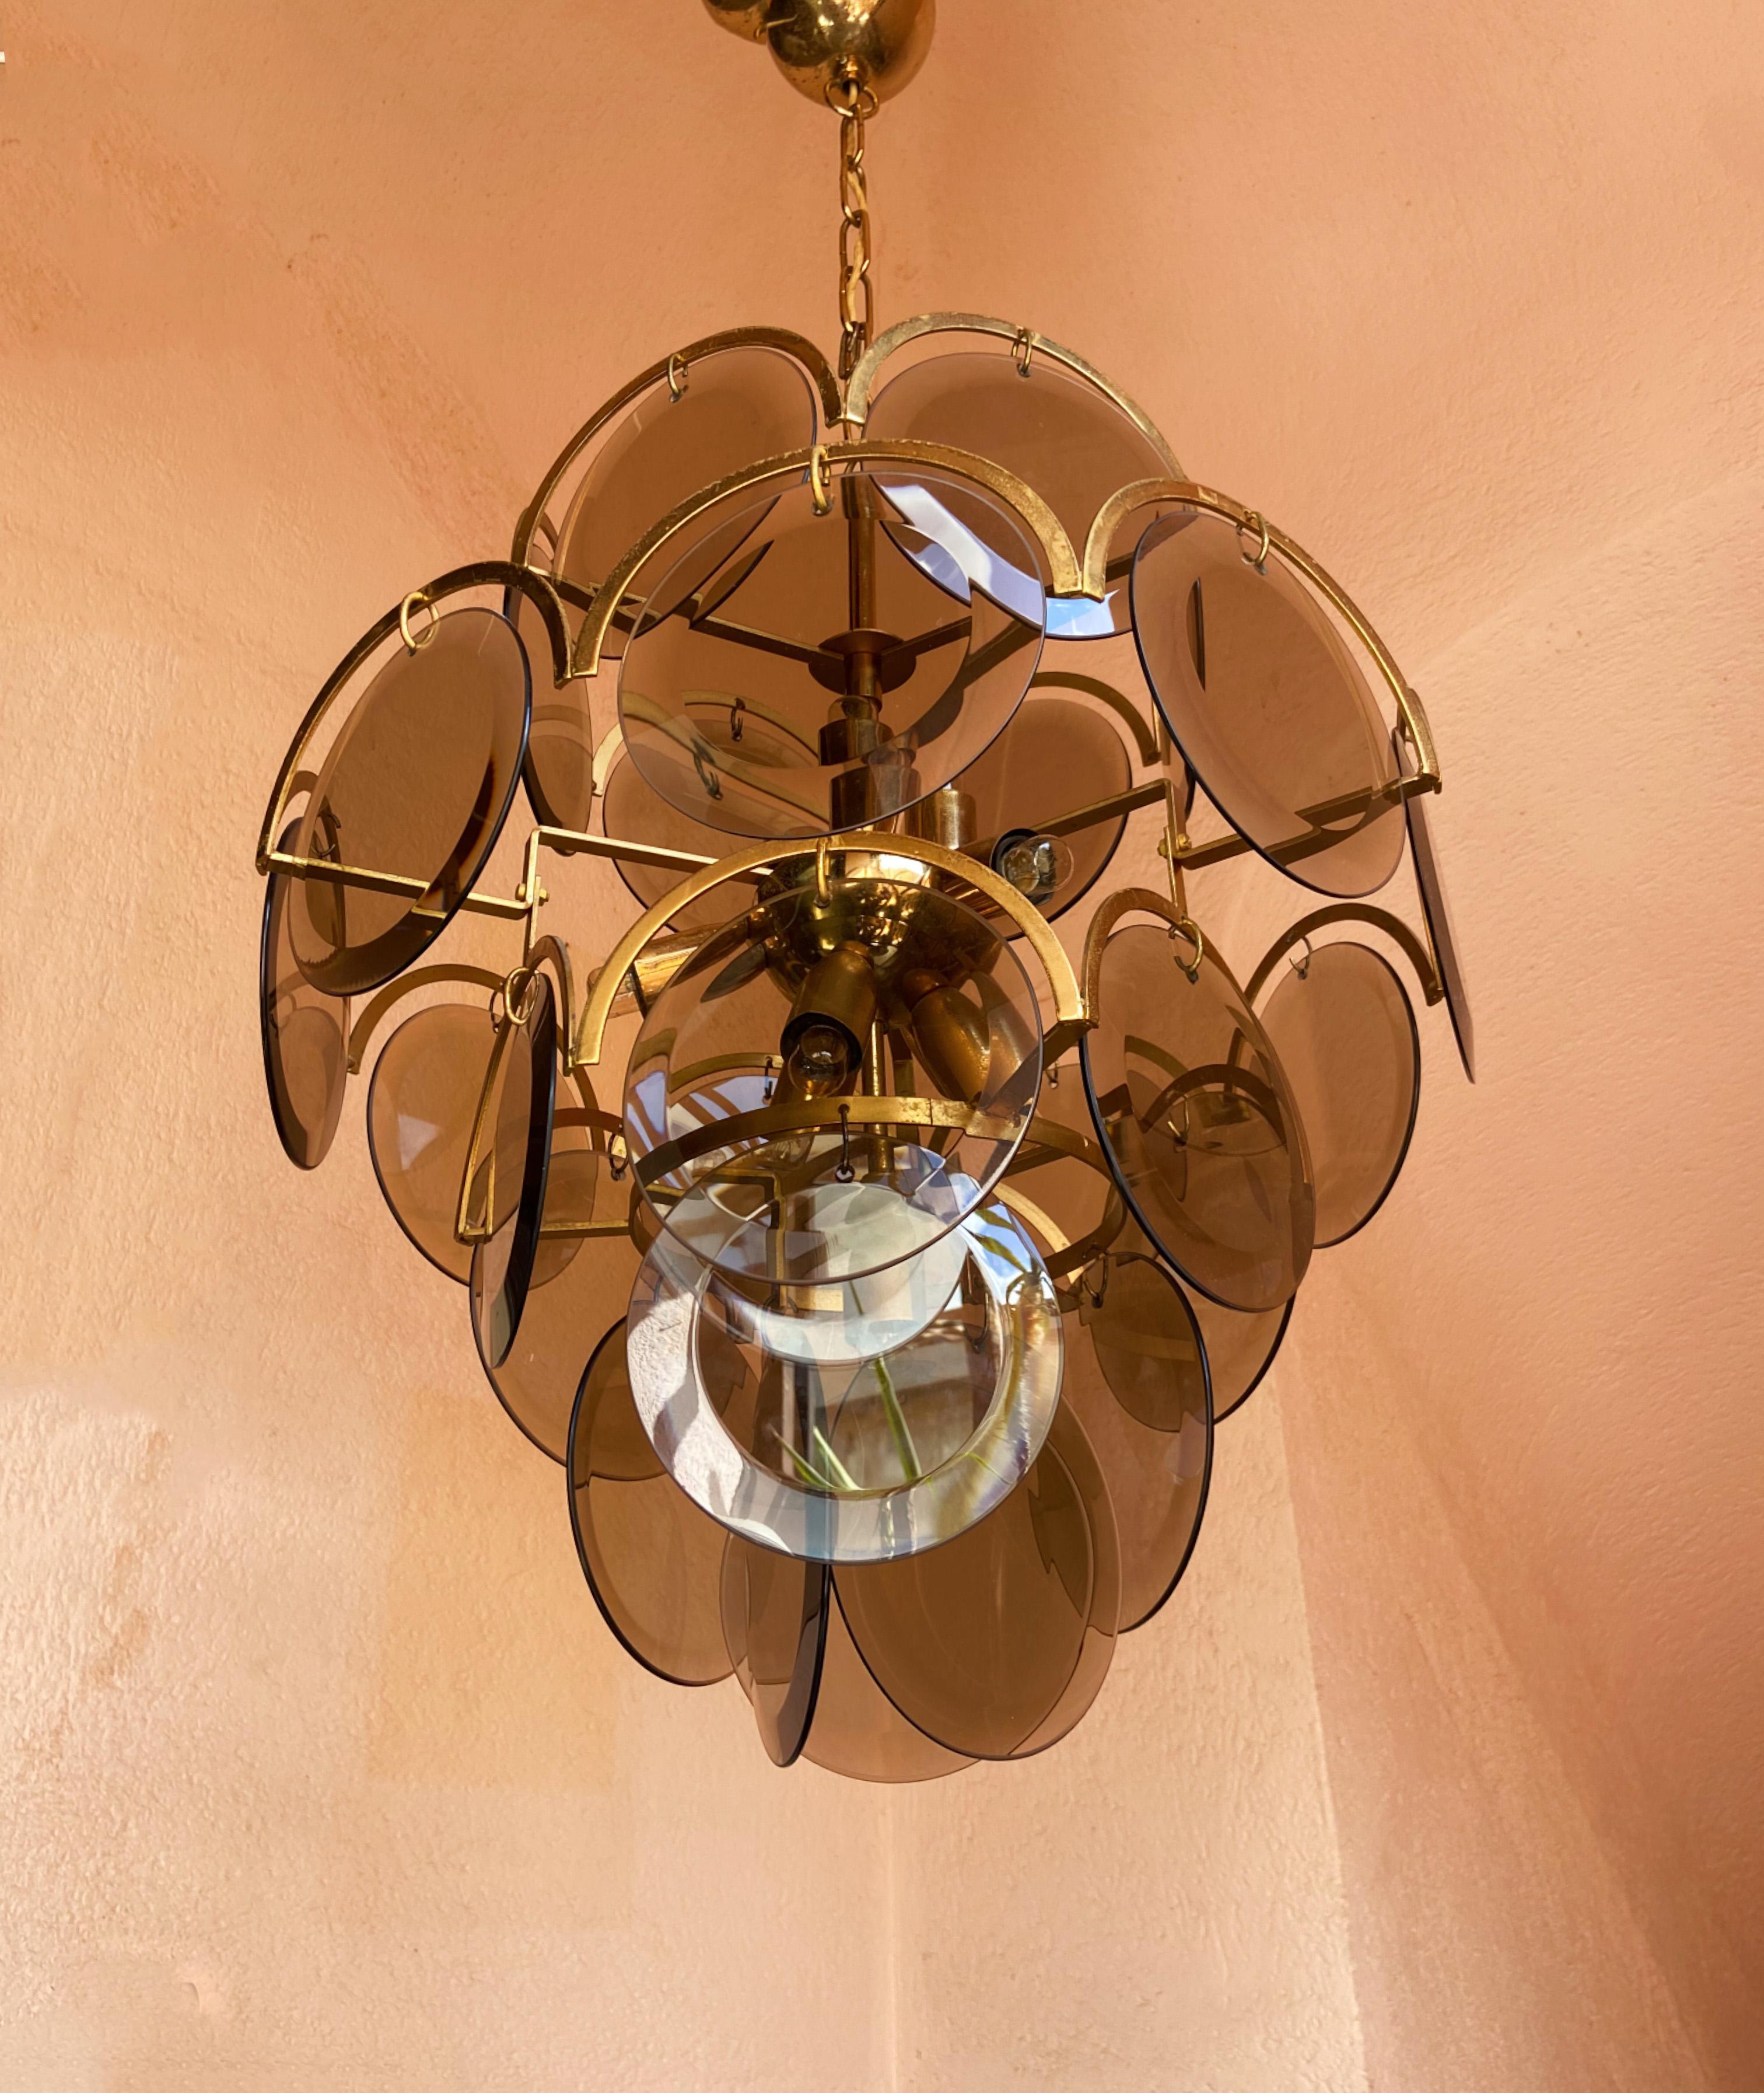 This beautiful luxury chandelier of Murano glass was designed by Gino Vistosi, 1970s. It is made from Murano art glass and is composed of 27 glass discs set on a metal base. The chandelier is in a good vintage condition. 10 light